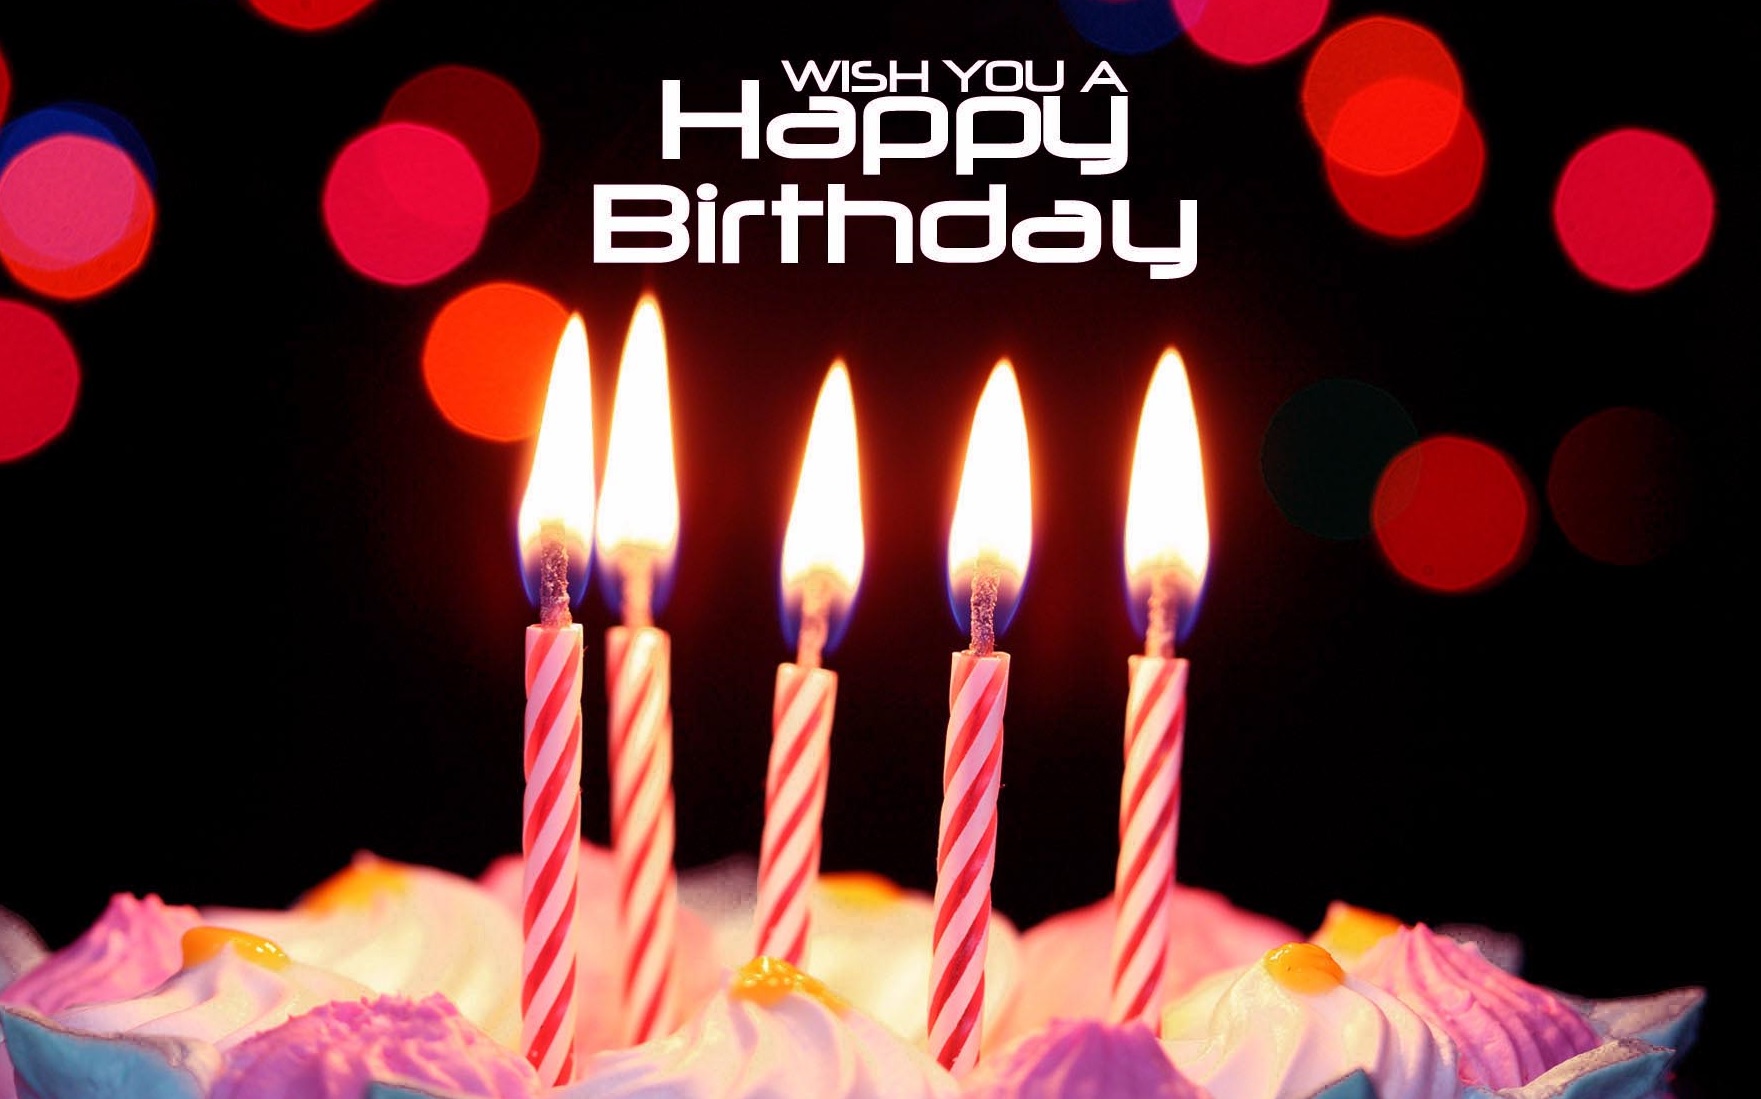 Best happy birthday message, wishes, images and wallpapers